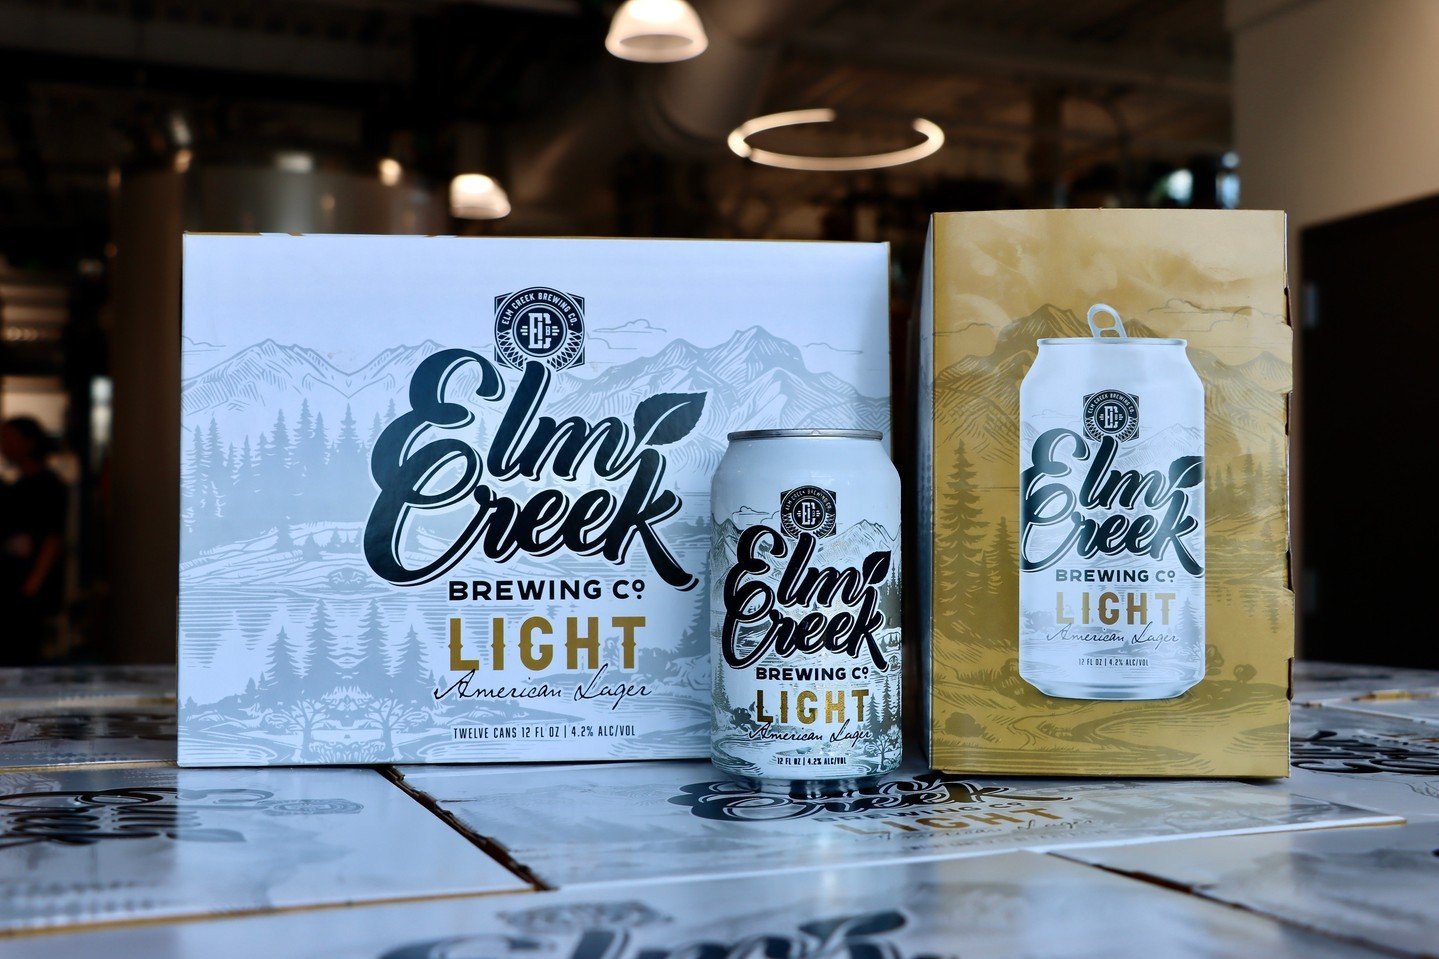 Yesterday, another one of our dreams came true 🤩⁠
⁠
We packaged our first 12 pack of 12oz Elm Creek Light Lager cans⁠
⁠
🍺  These perfect cartons of joy will be popping up on liquor store shelves soon, so keep an eye out! Tell your favorite liquor s